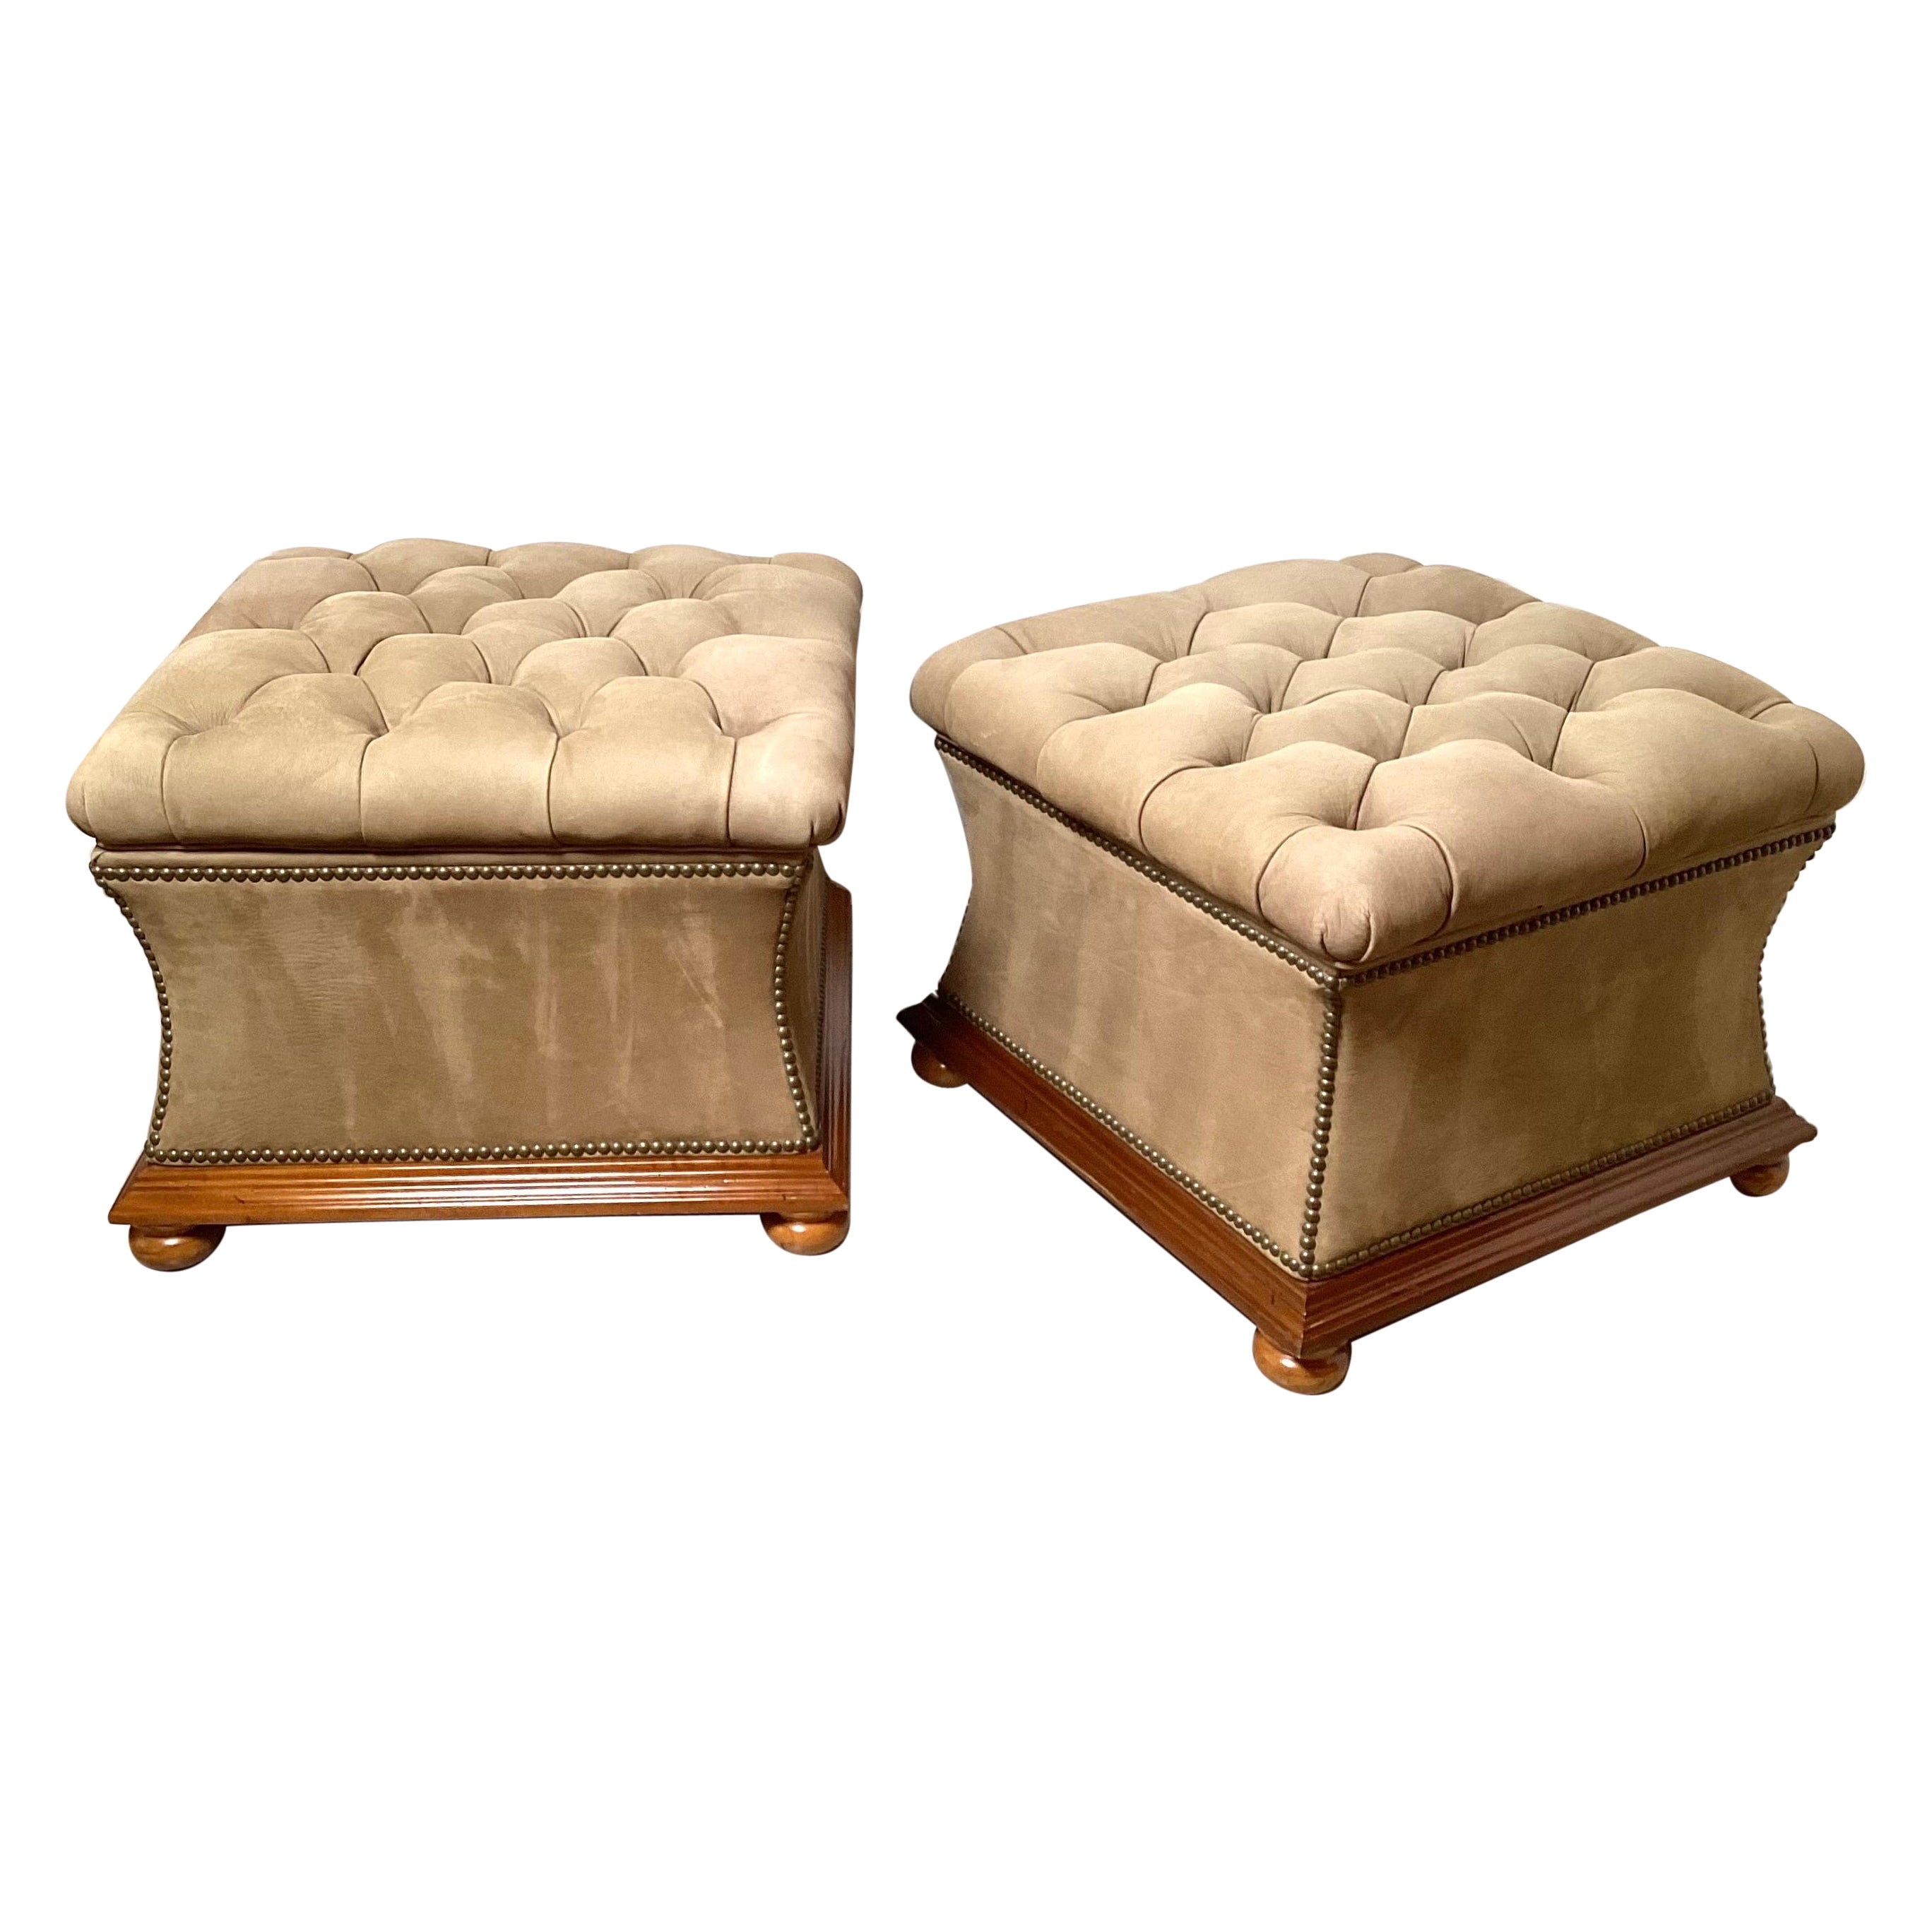 Pair of Sueded Leather Tufted Storage Ottomans, in the Manner of Ralph Lauren